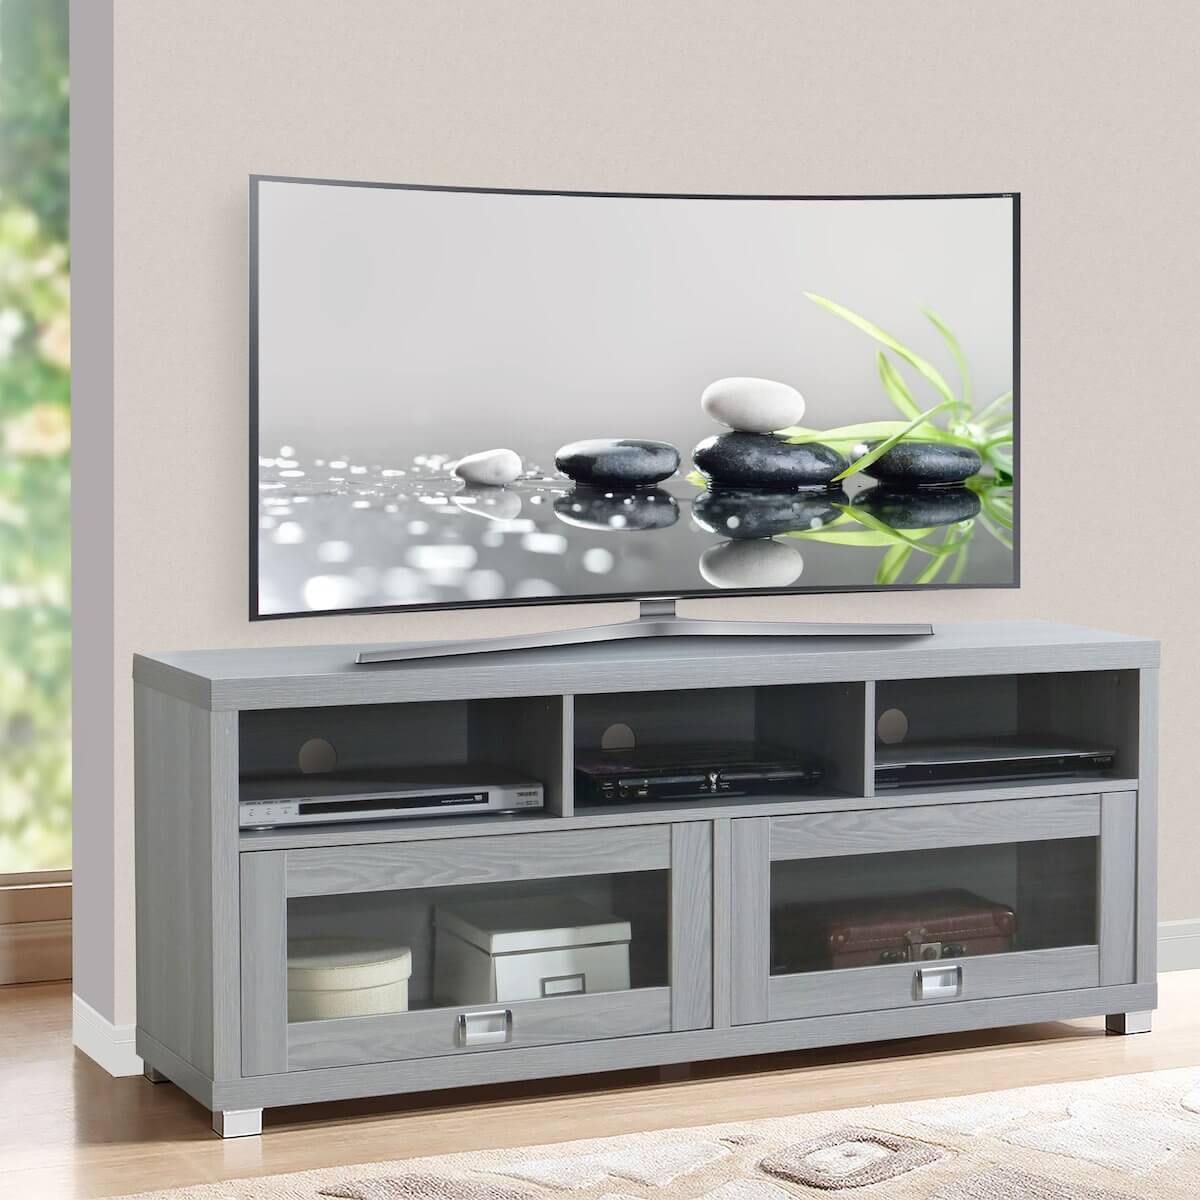 Techni Mobili Gray Durbin TV Stand for TVs up to 65" RTA-8850-GRY with TV in Room